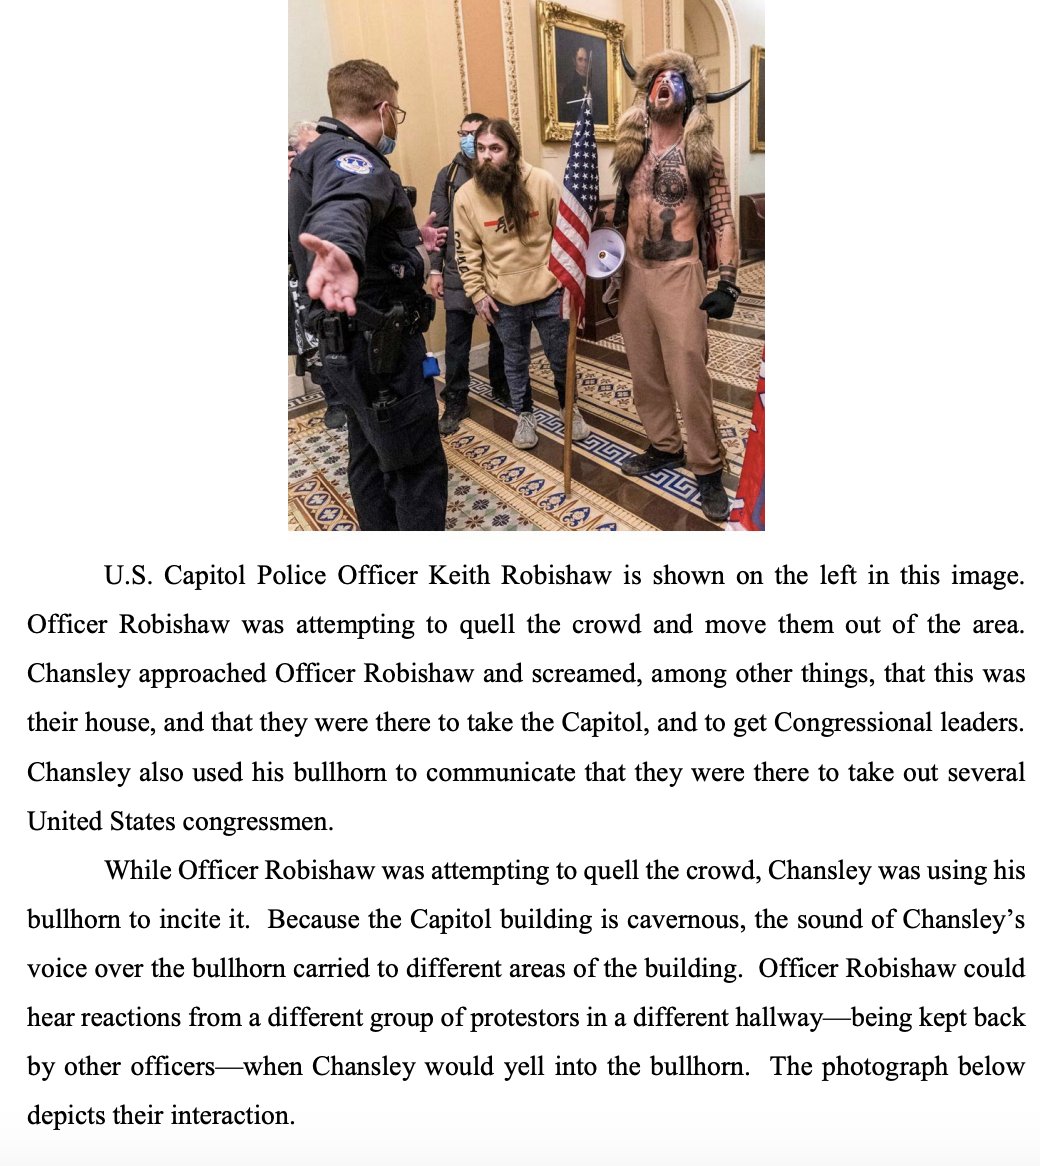 MORE details about the Q Shaman, Jake Chansley, released tonight. He apparently used a bullhorn to urge people to "get Congressional leaders" and told a cop they were there to take over the Capitol https://www.courtlistener.com/recap/gov.uscourts.azd.1258007/gov.uscourts.azd.1258007.5.0.pdf